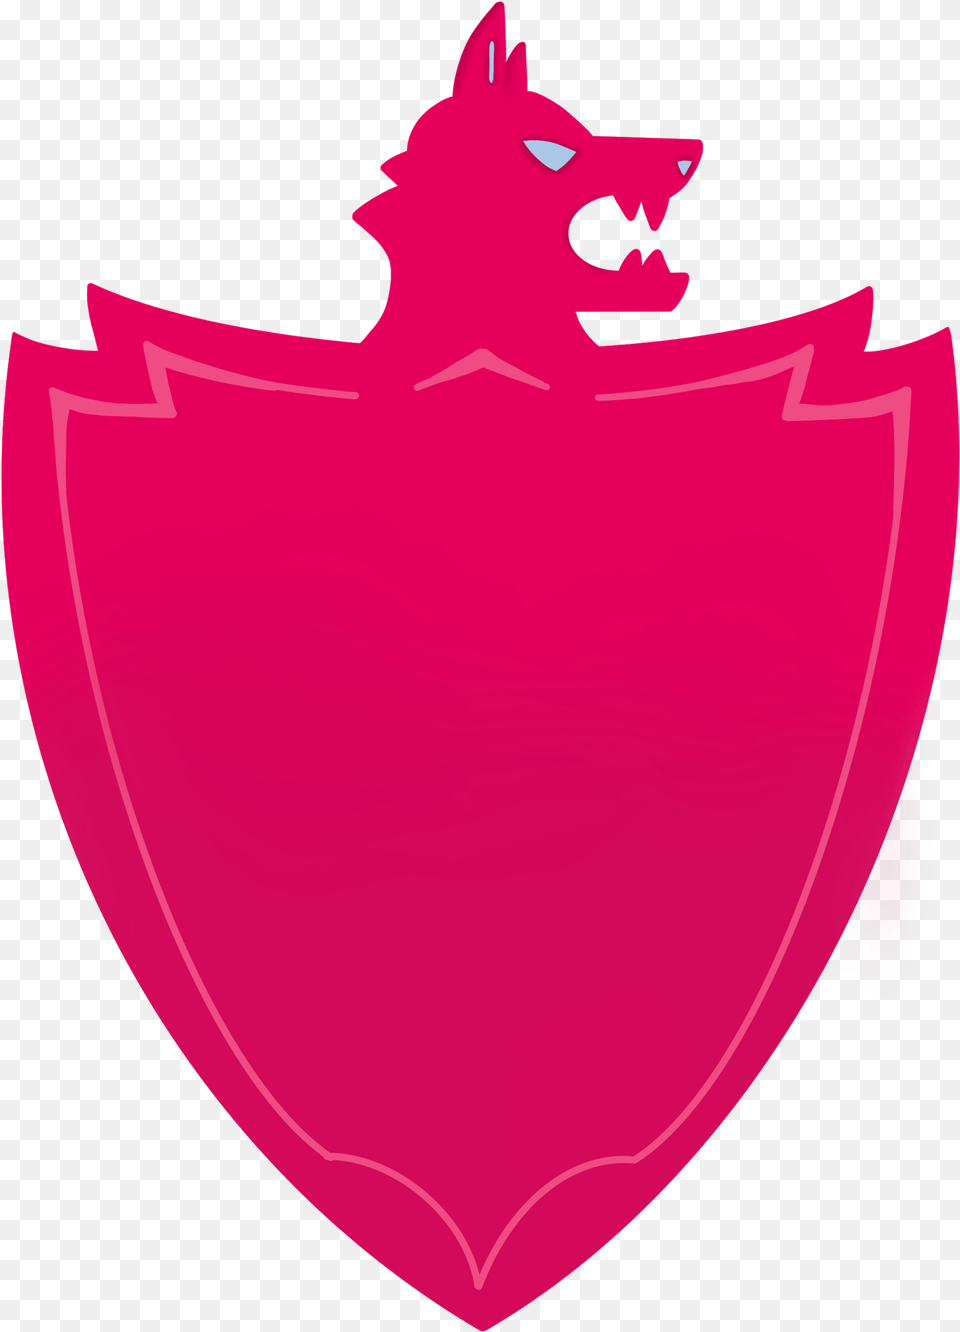 Sword And Shield Logos Pokemon Sword And Shield Logo, Armor Free Transparent Png